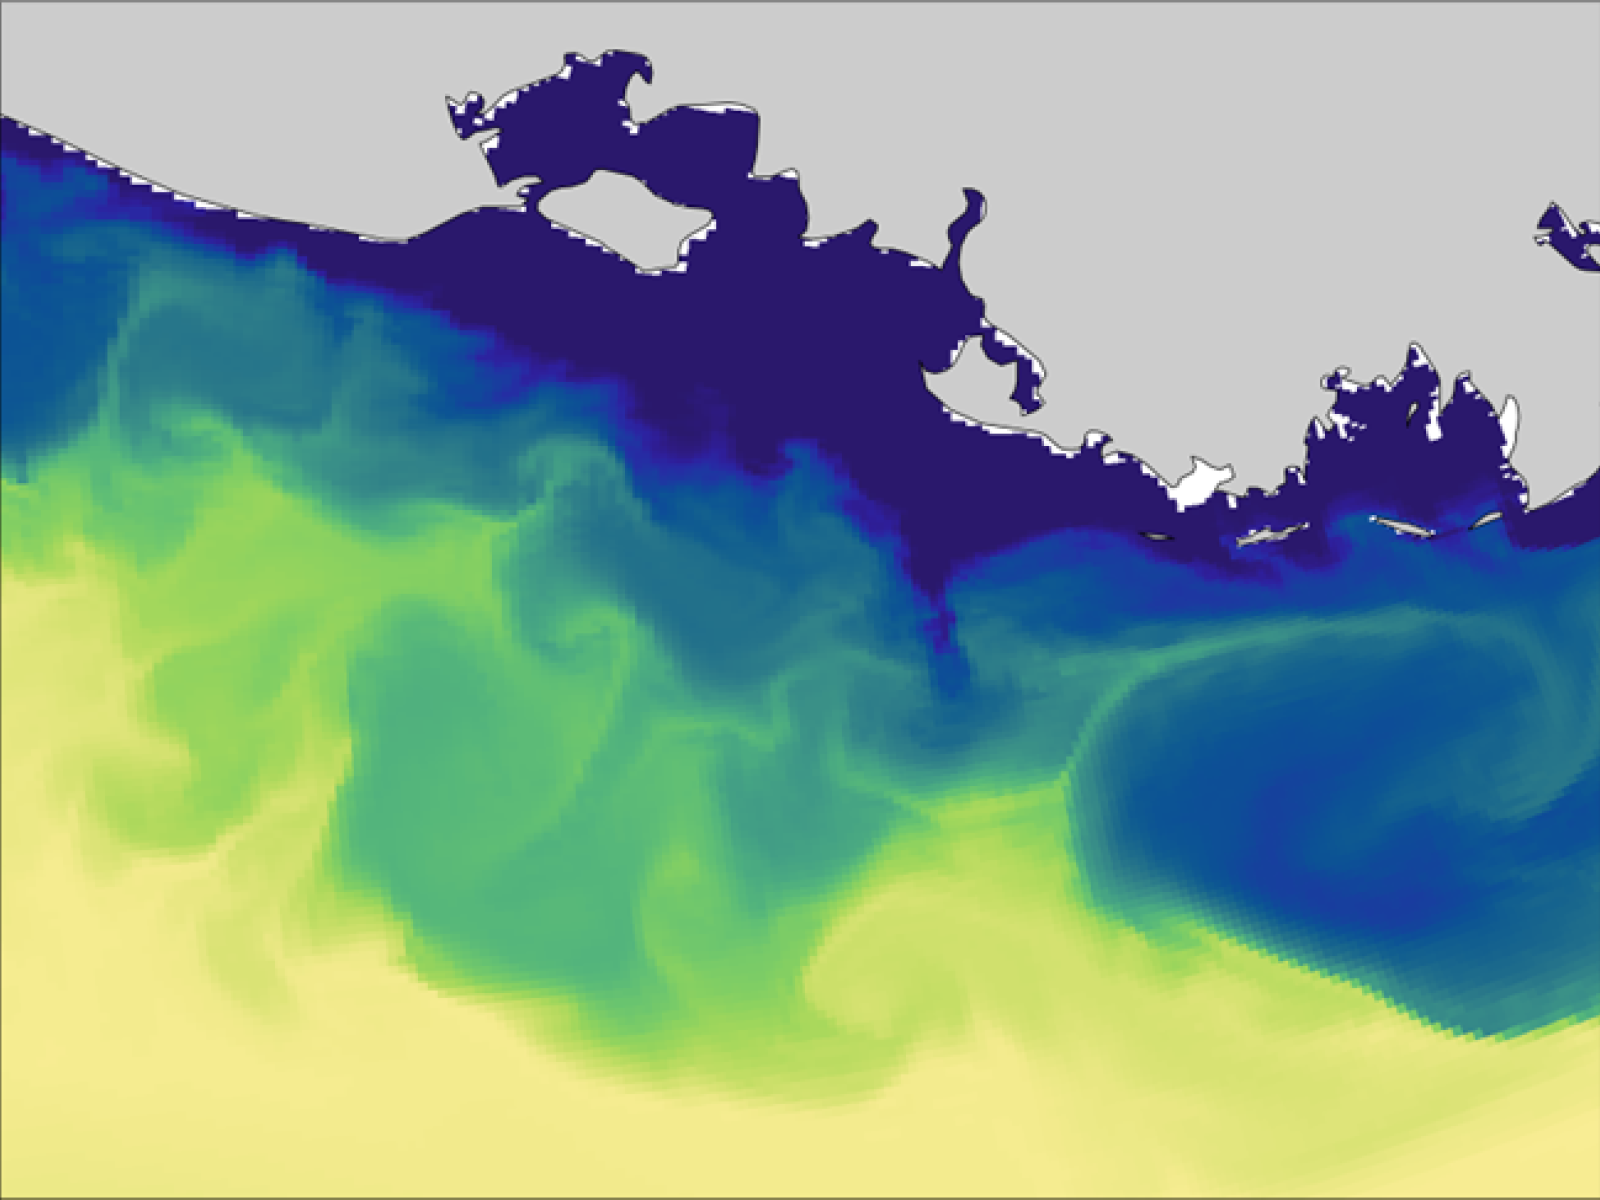 Graphic showing salinity fronts in an ocean using swirls of color